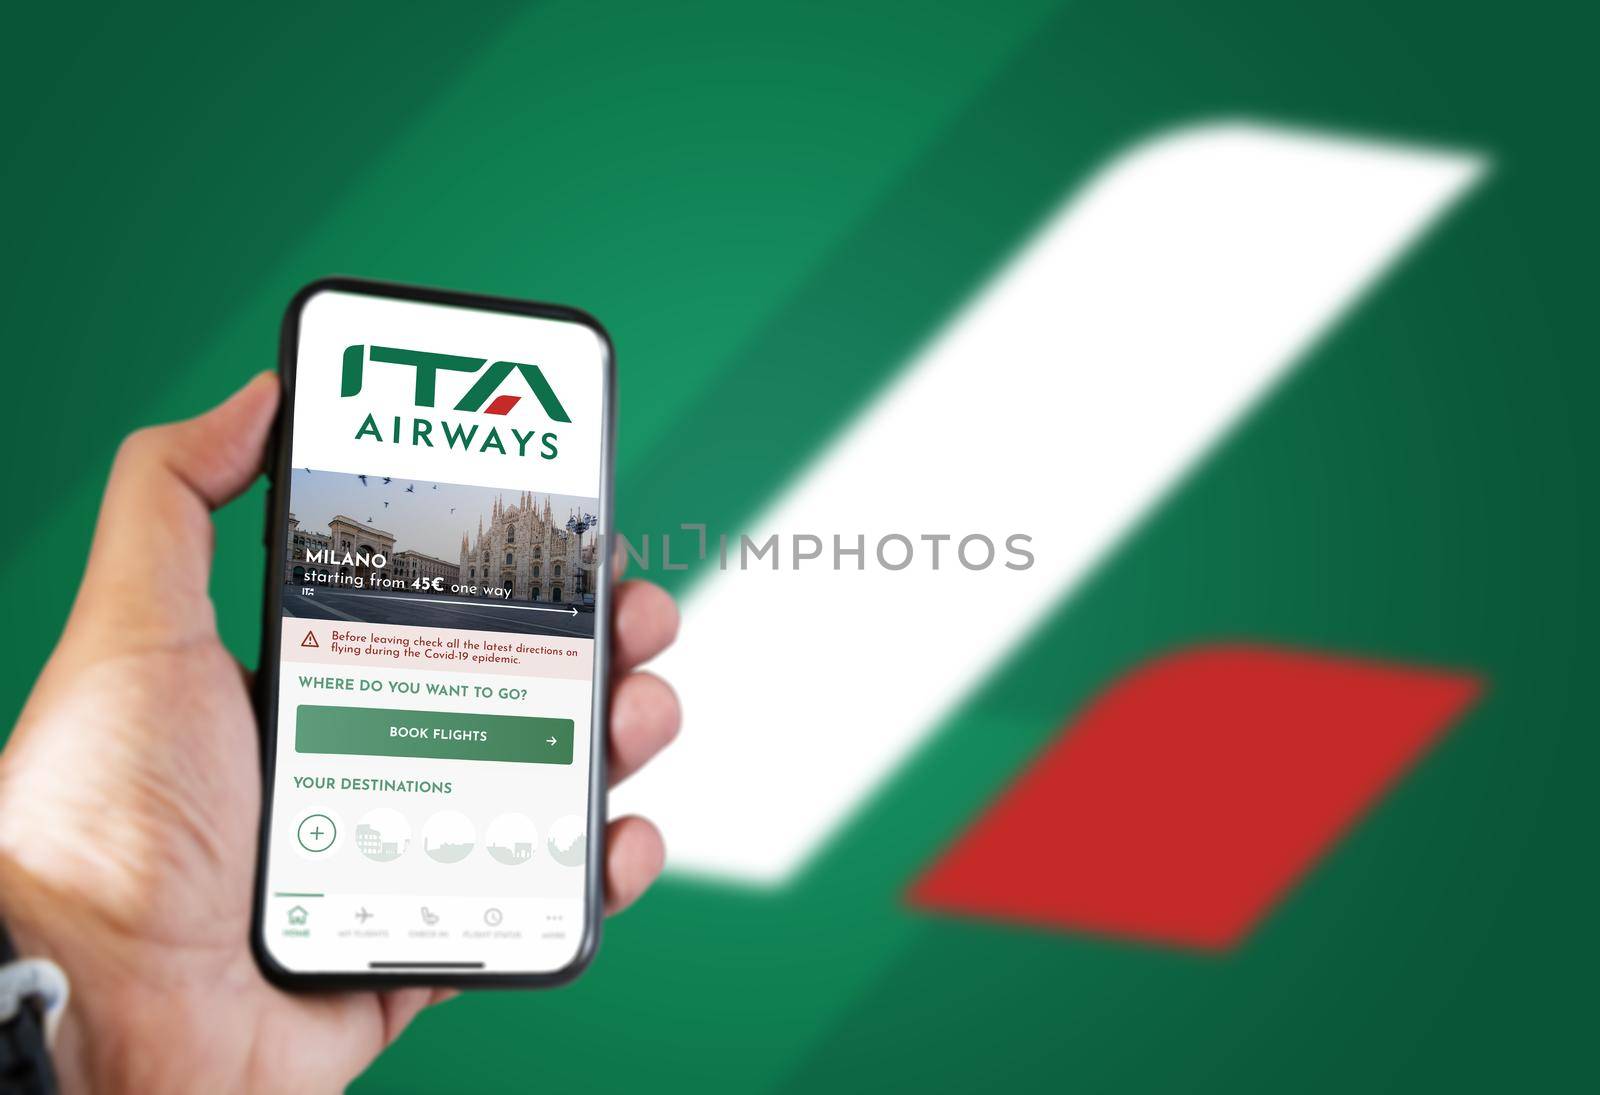 Rome, IT, October 2021: A hand holding a phone with the ITA Airways app on the screen by rarrarorro